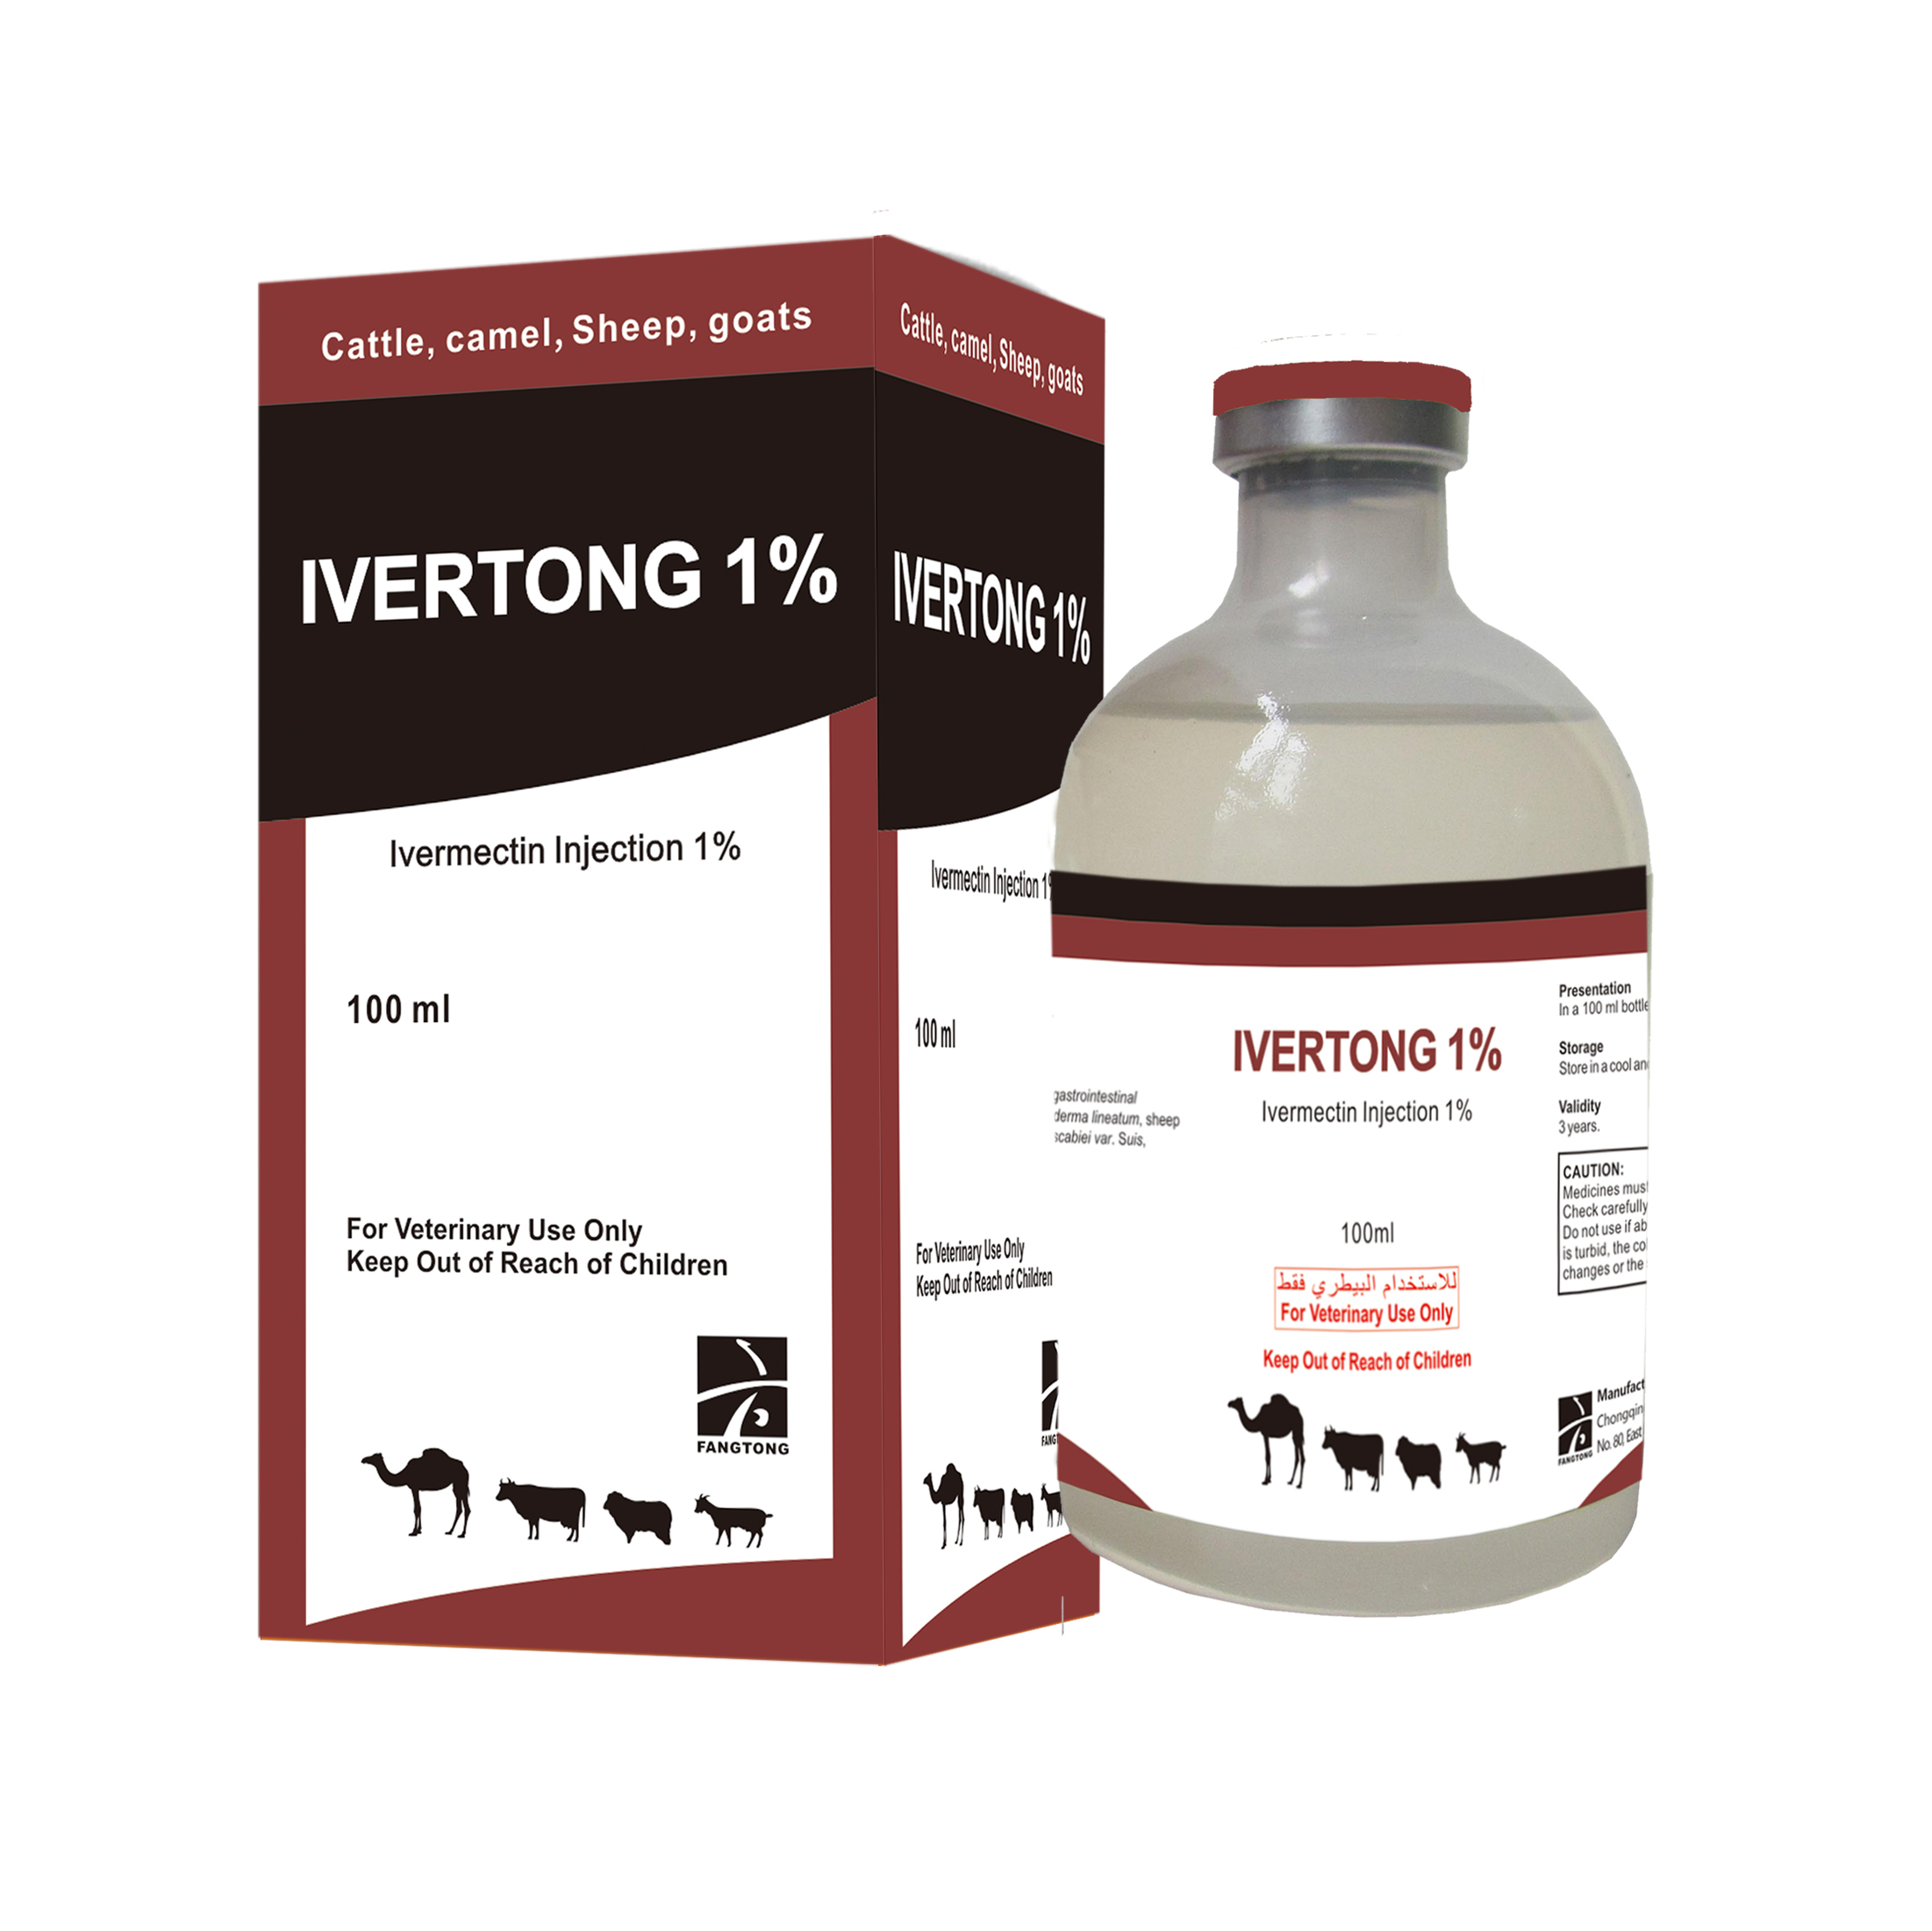 IVERTONG 1% ivermectin injection 1% Featured Image